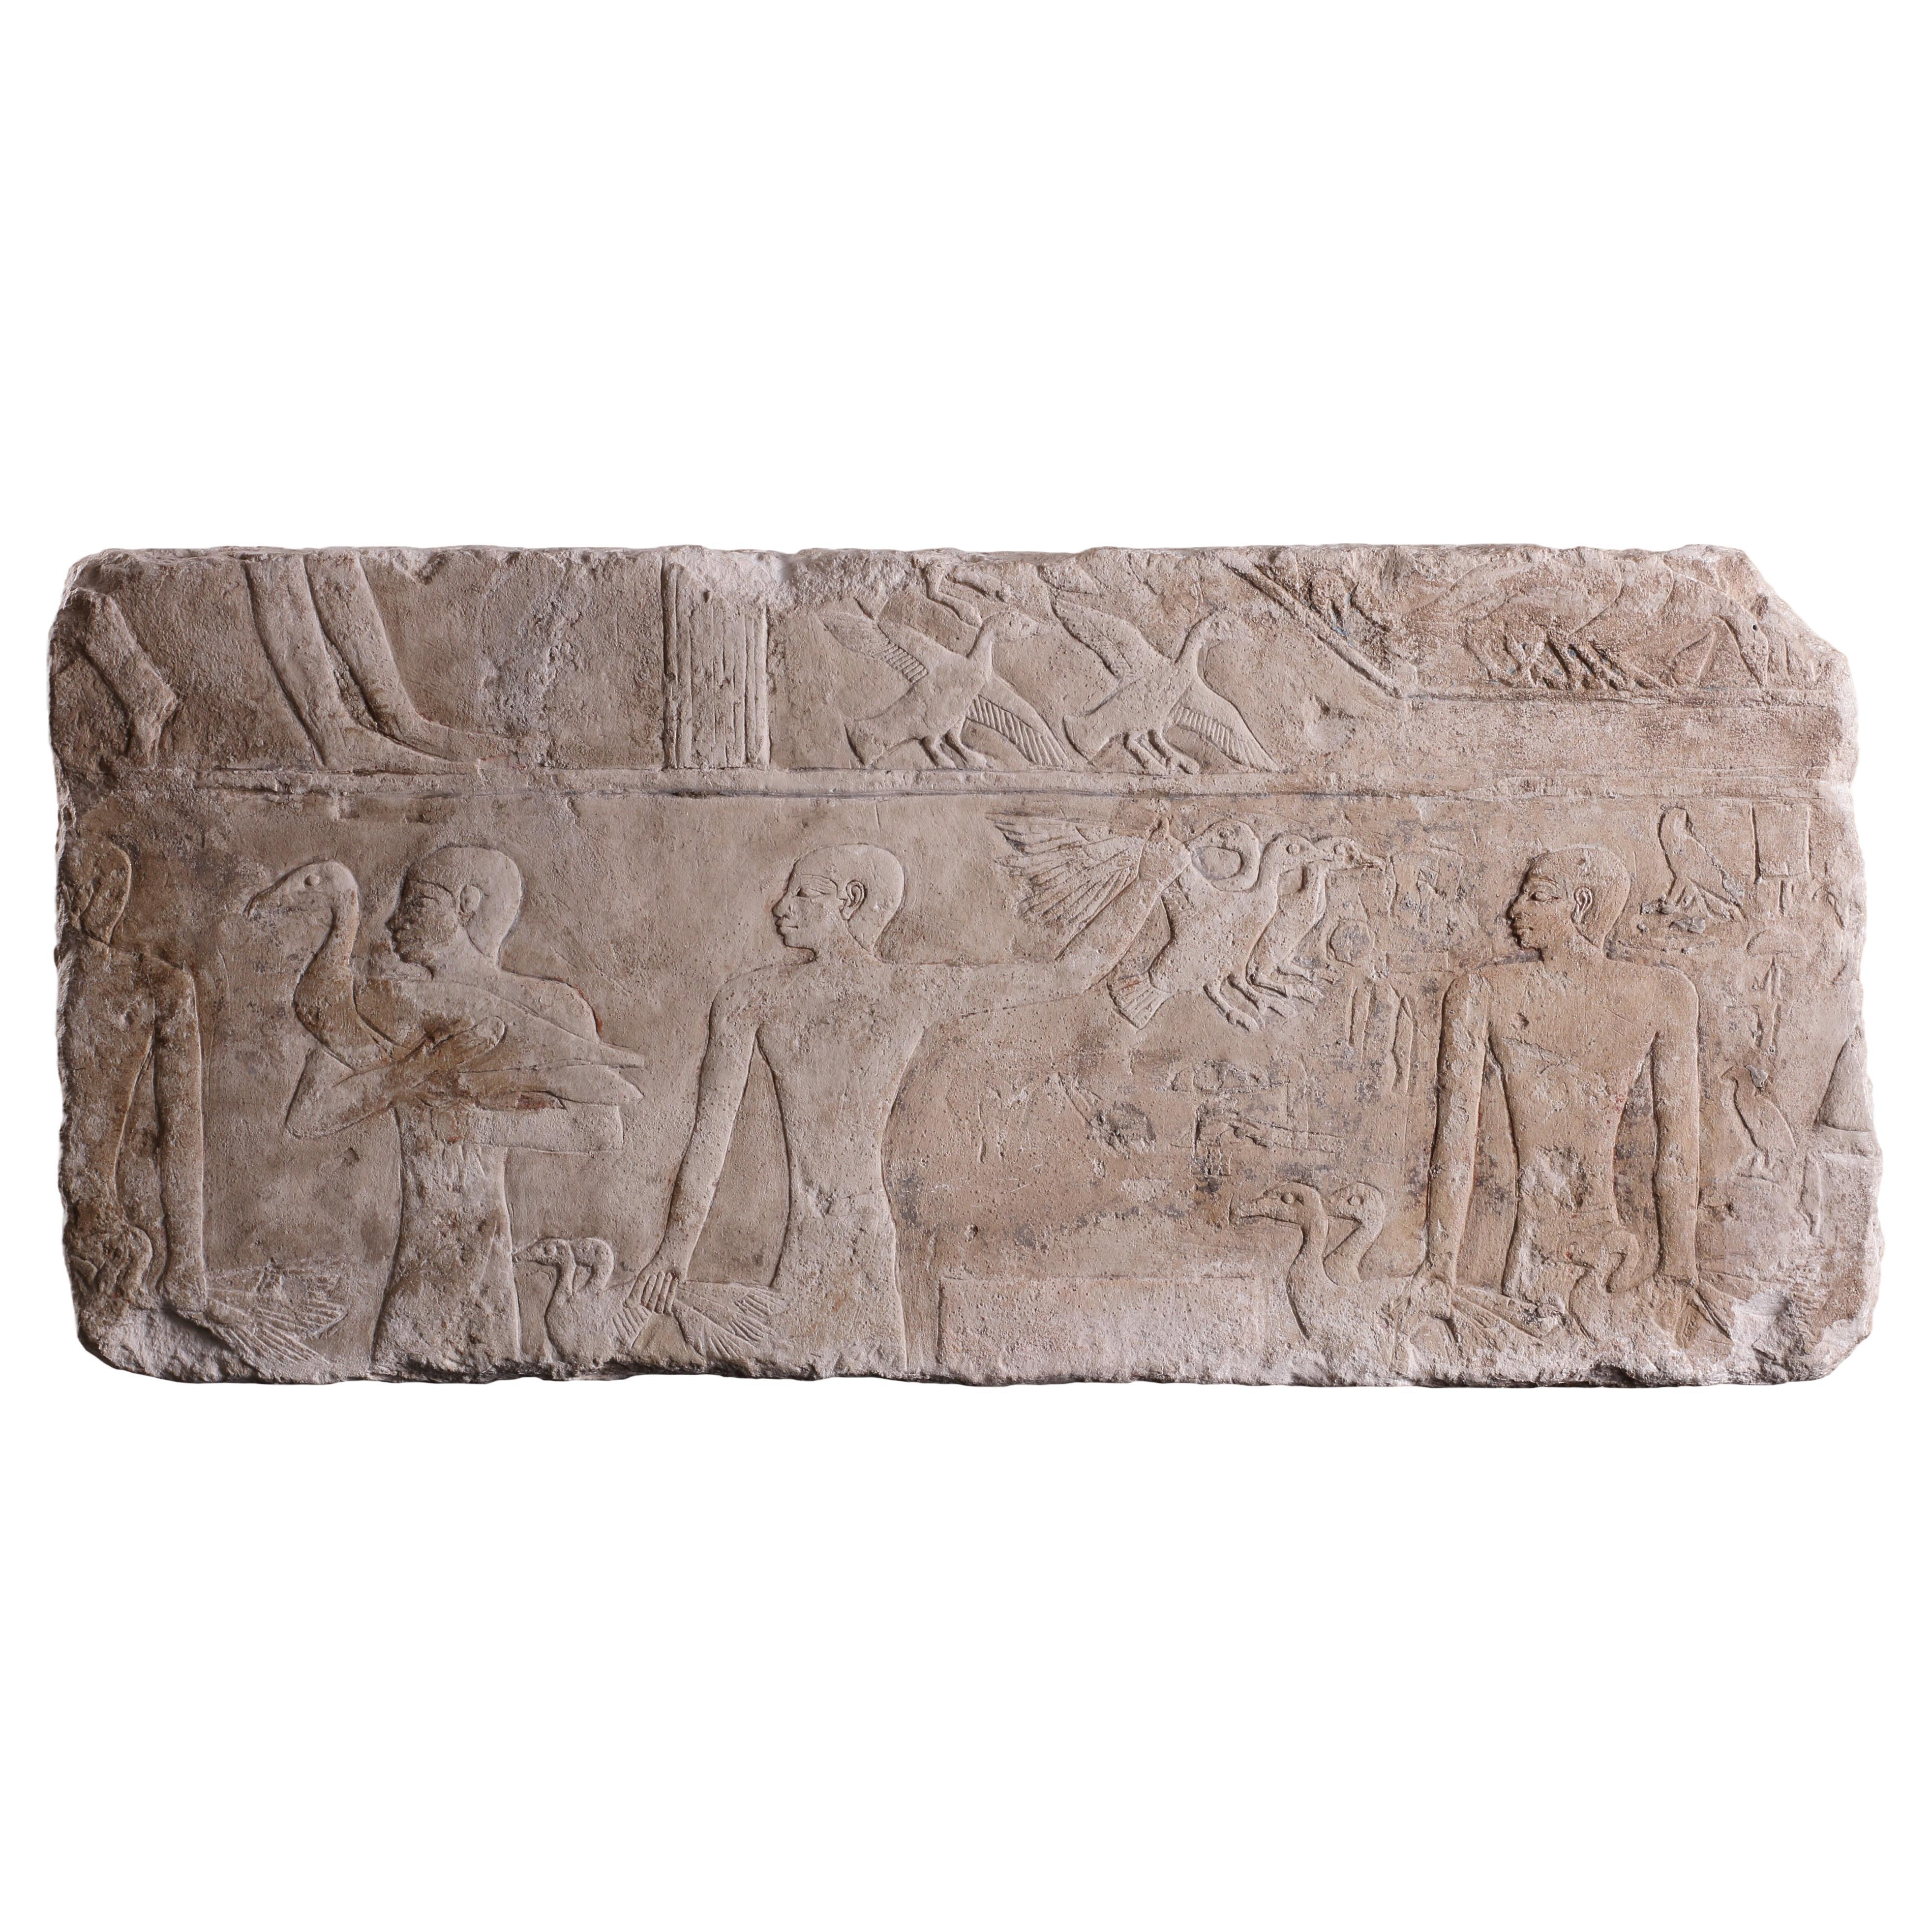 A Fine and Large Egyptian Limestone Relief Carved in Shallow Relief For Sale